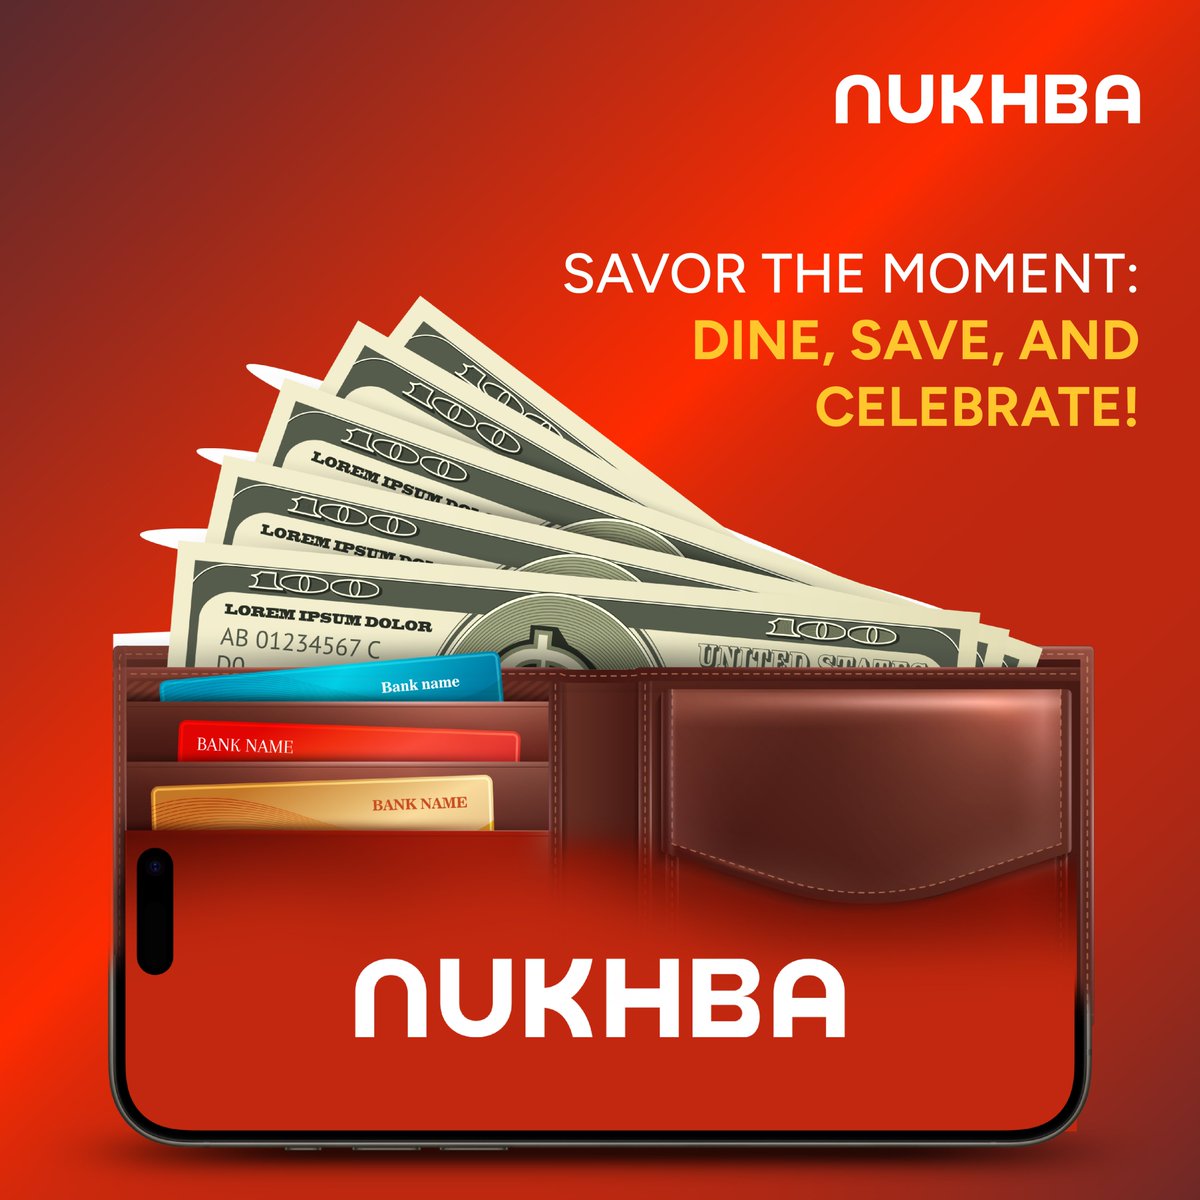 Savor, Save, and Repeat: Nukhba's Recipe for Consistent Dining Happiness! Elevate every dining experience with unwavering commitment to savings. 

#nukhba #nukhbaApp #dubairestaurants #dubaieats #dubaifood #finediningdubai #restaurantsindubai #visitdubai #mydubai #dubaifoodie